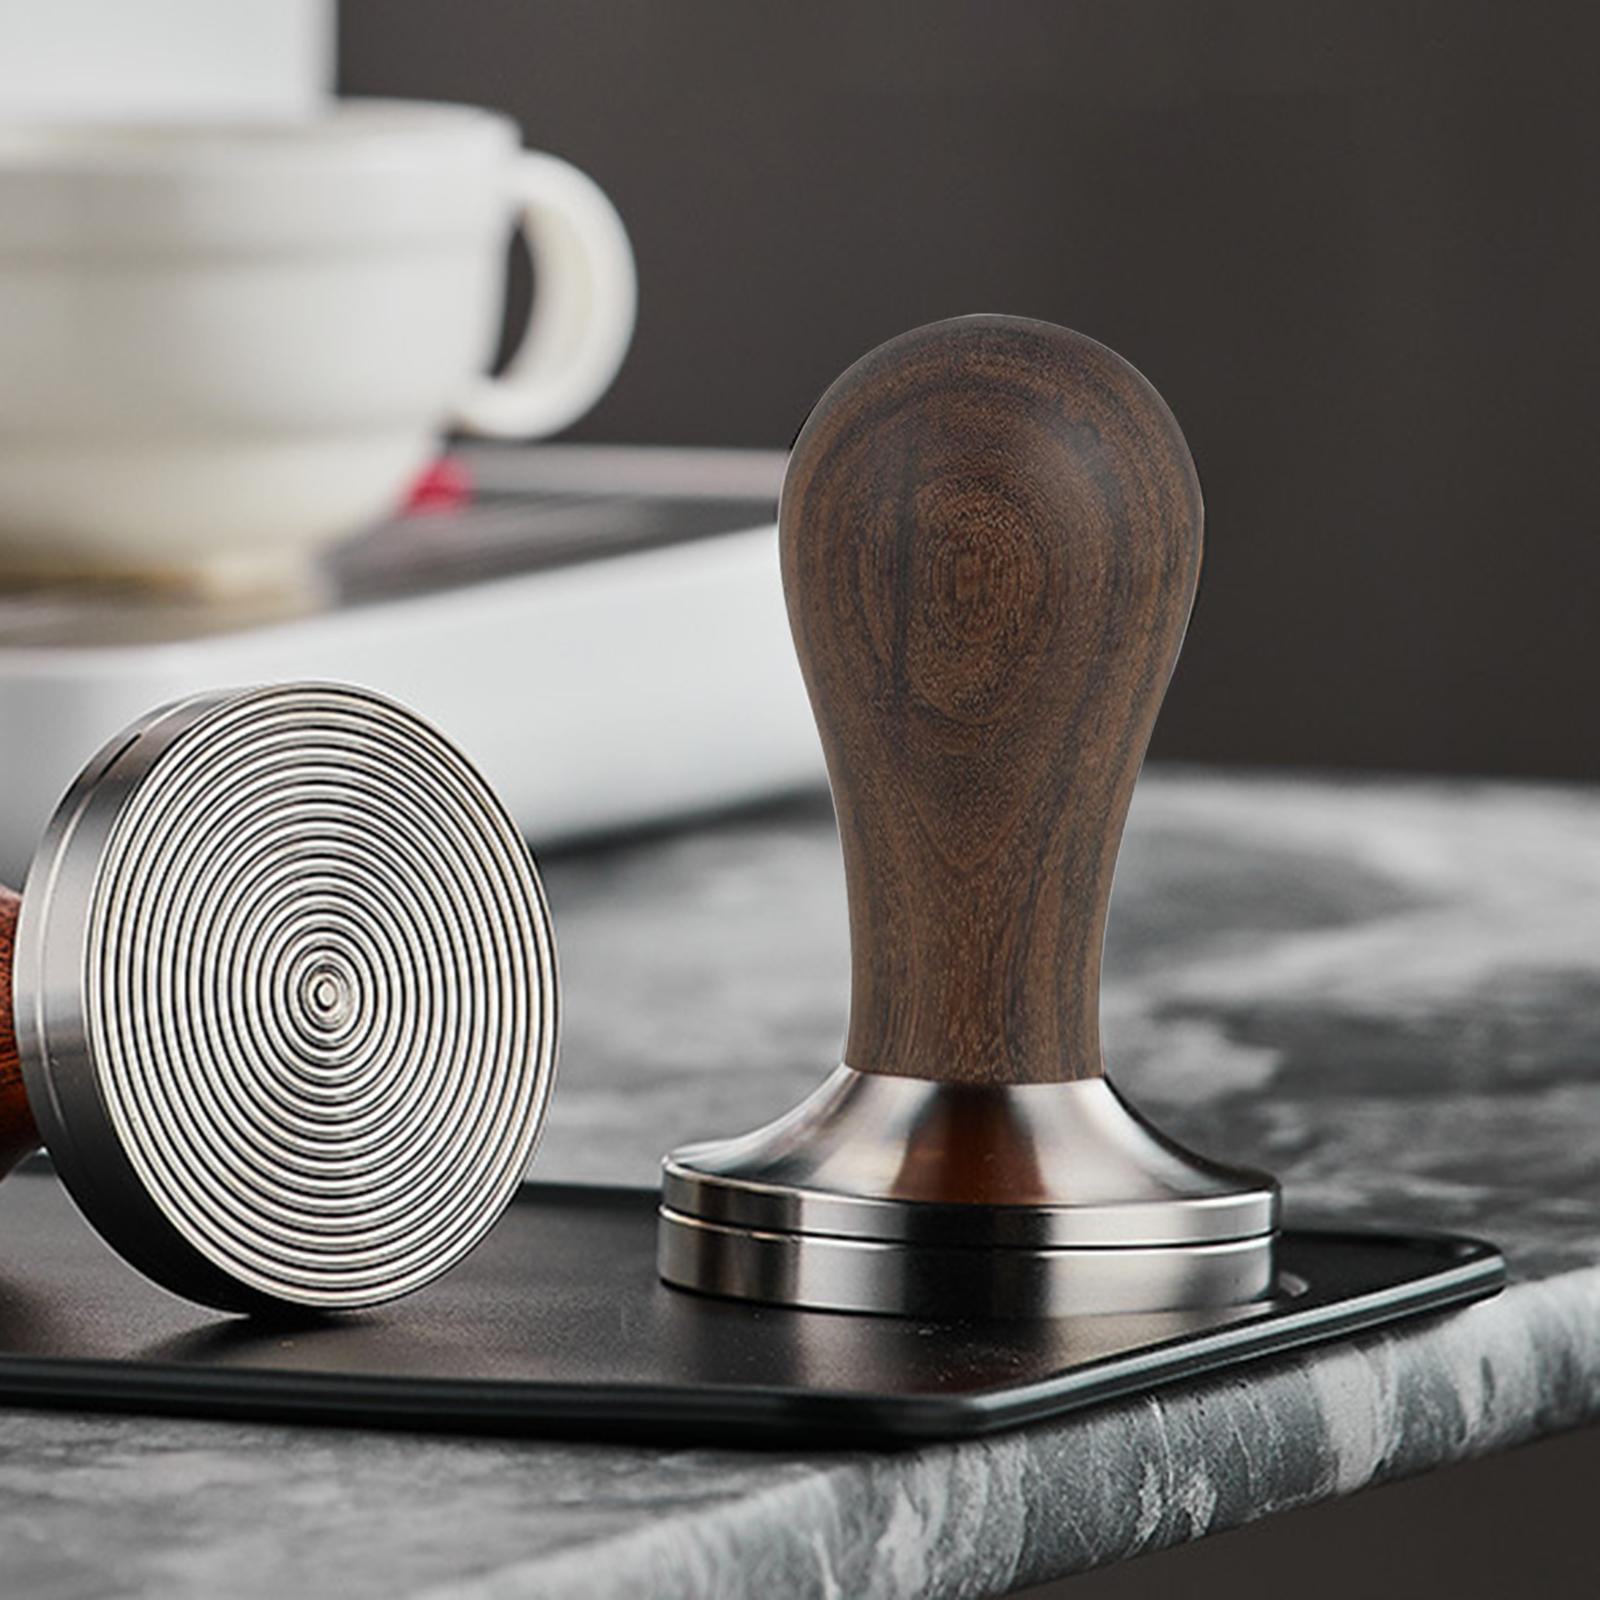 58mm Coffee Tamper, Espresso Tamper Barista 58mm Hand Tamper by CrossCreek  with Stainless Steel Flat Base 6296-51202-01A 